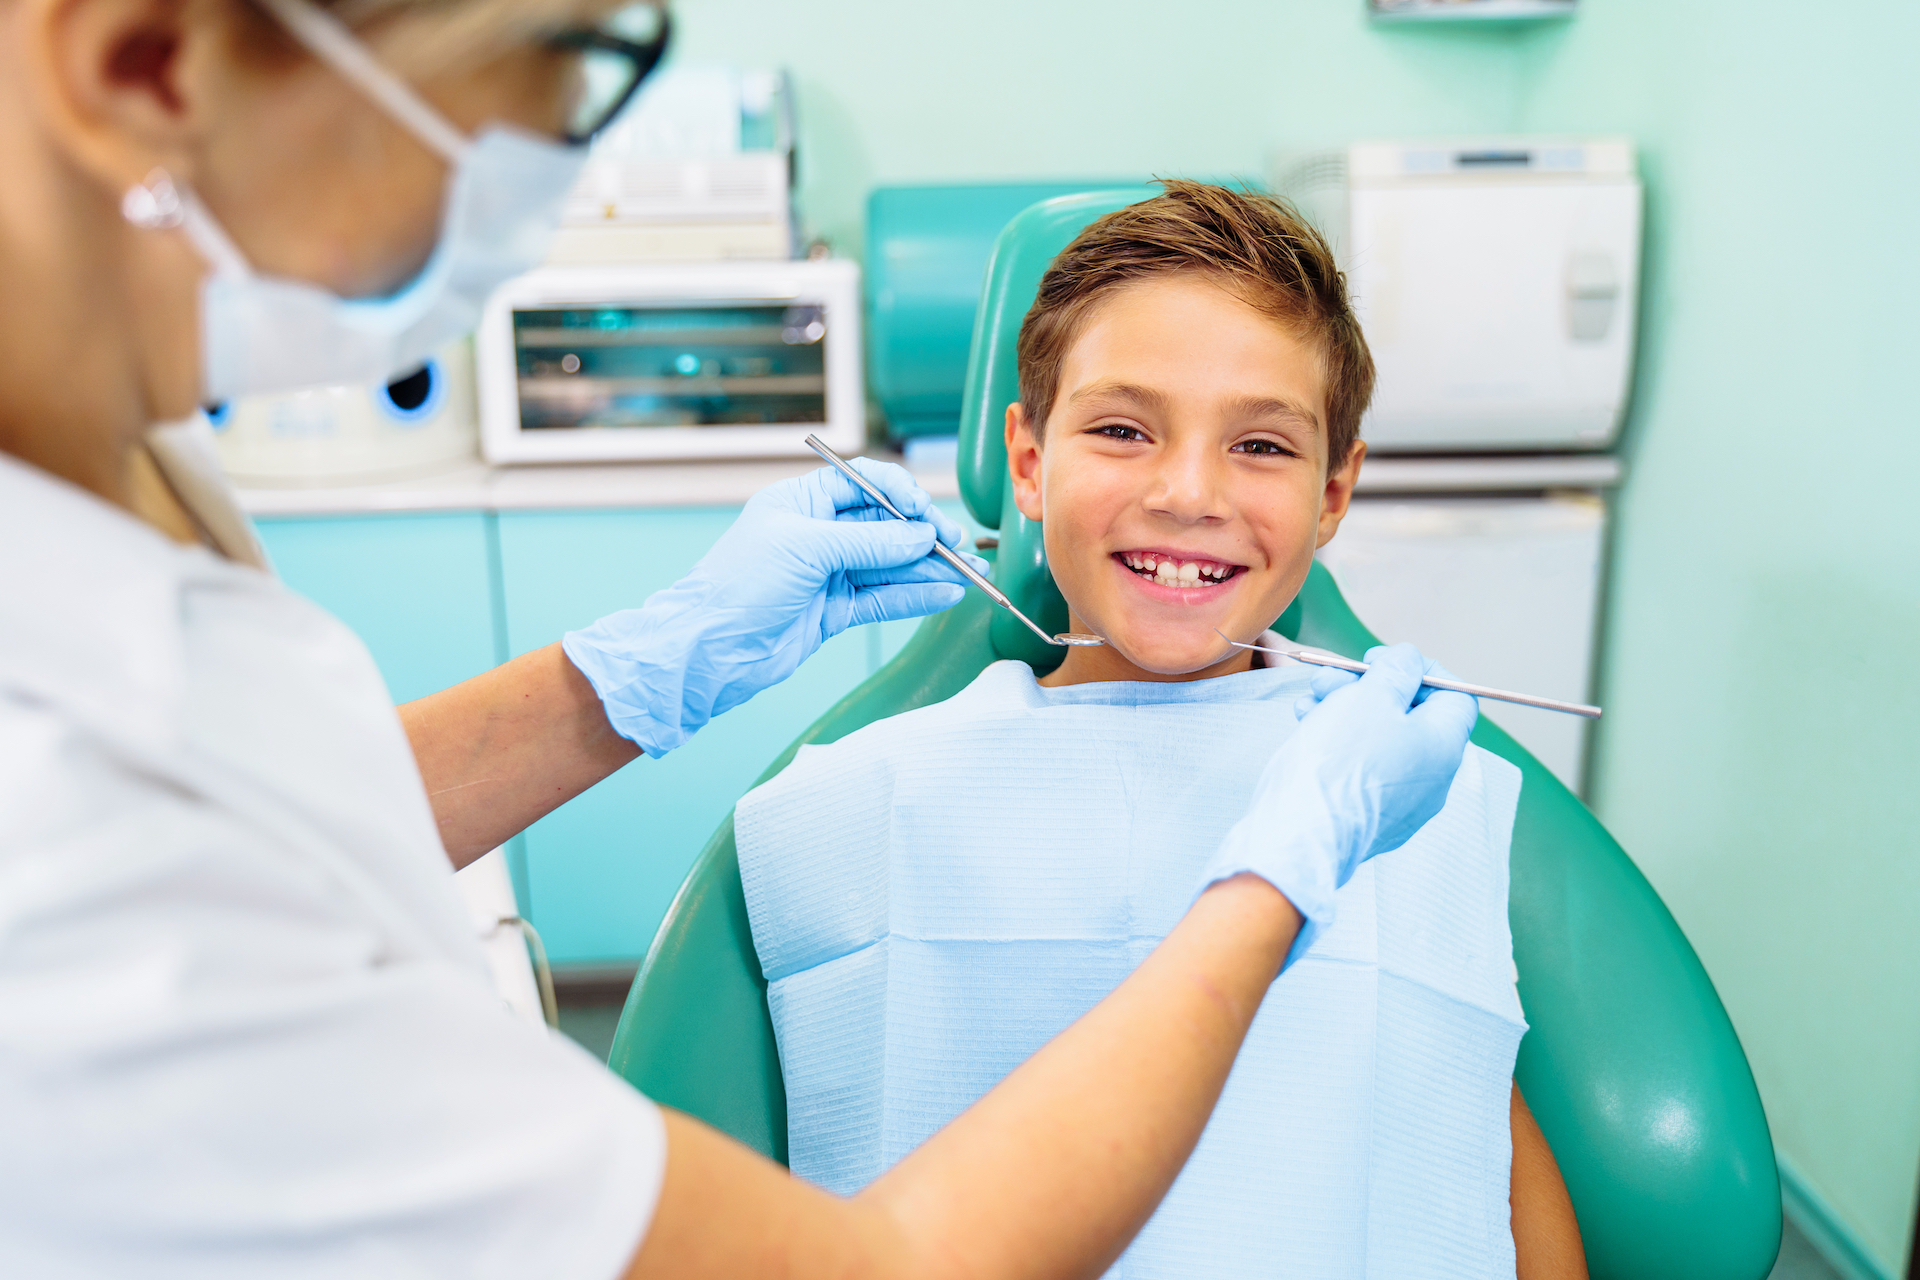 Paediatric Dentistry at Our Office: Why it's Important